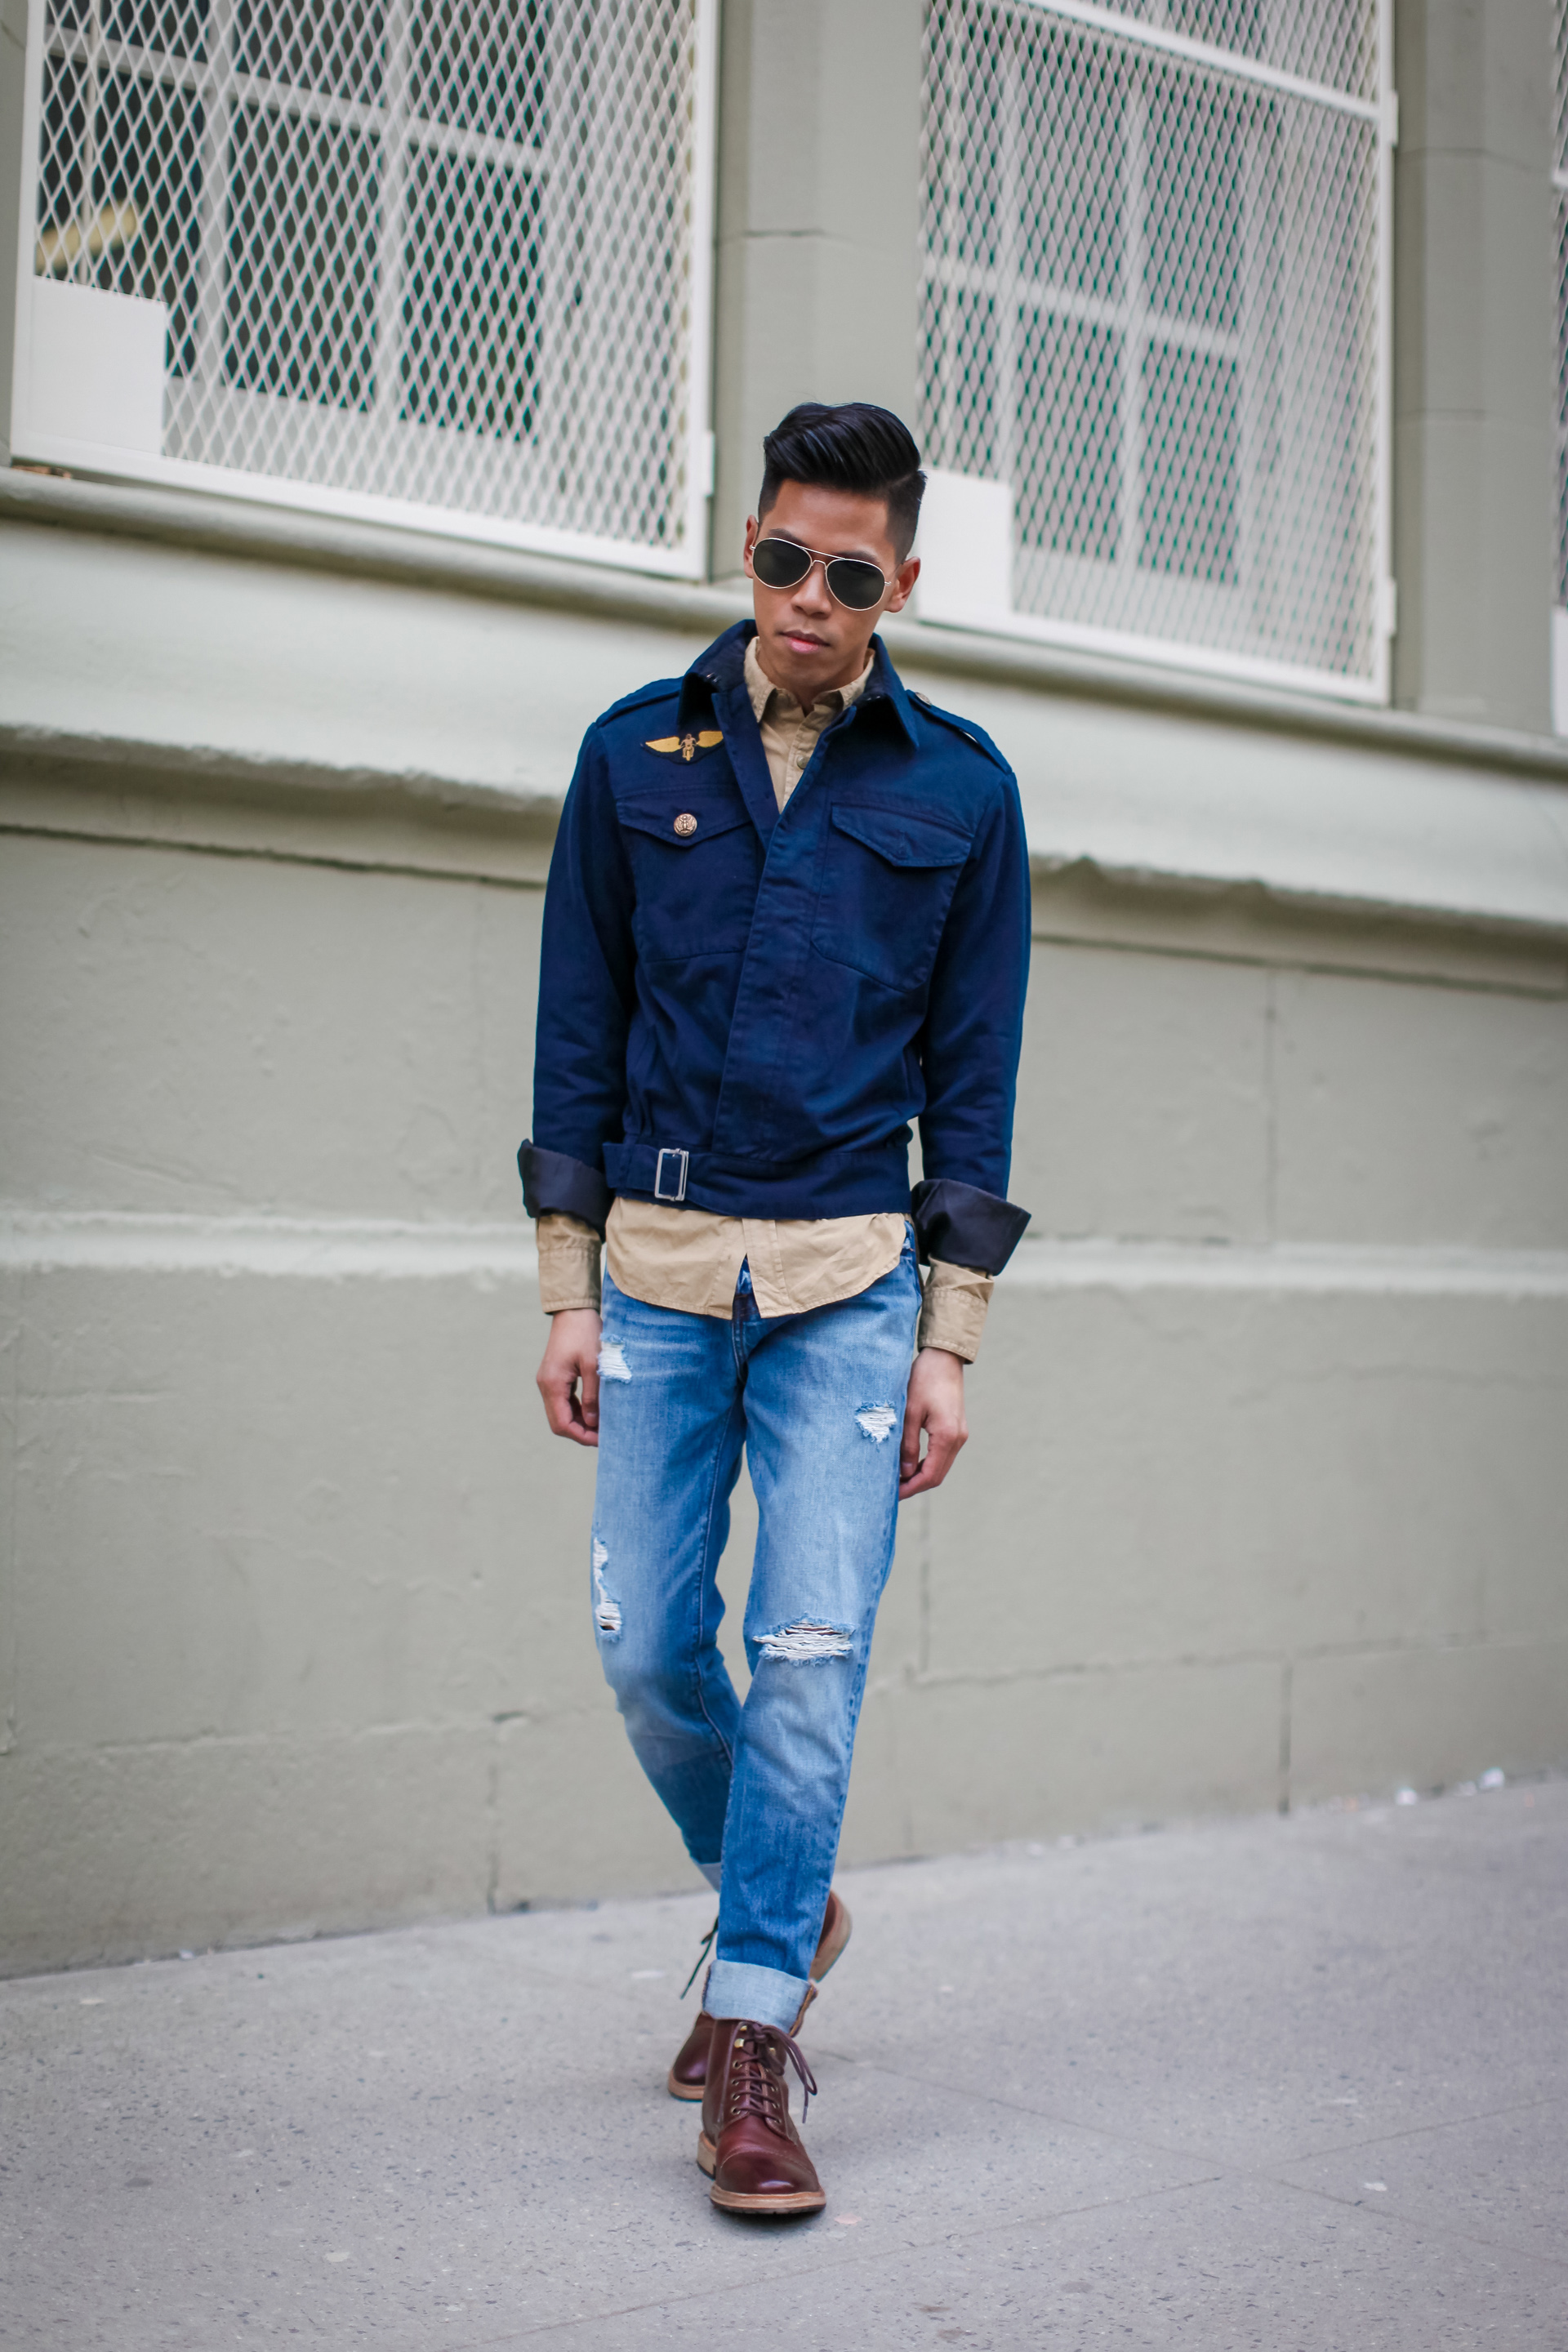 oh anthonio - Anthony Urbano - men's aviator pilot inspired outfit